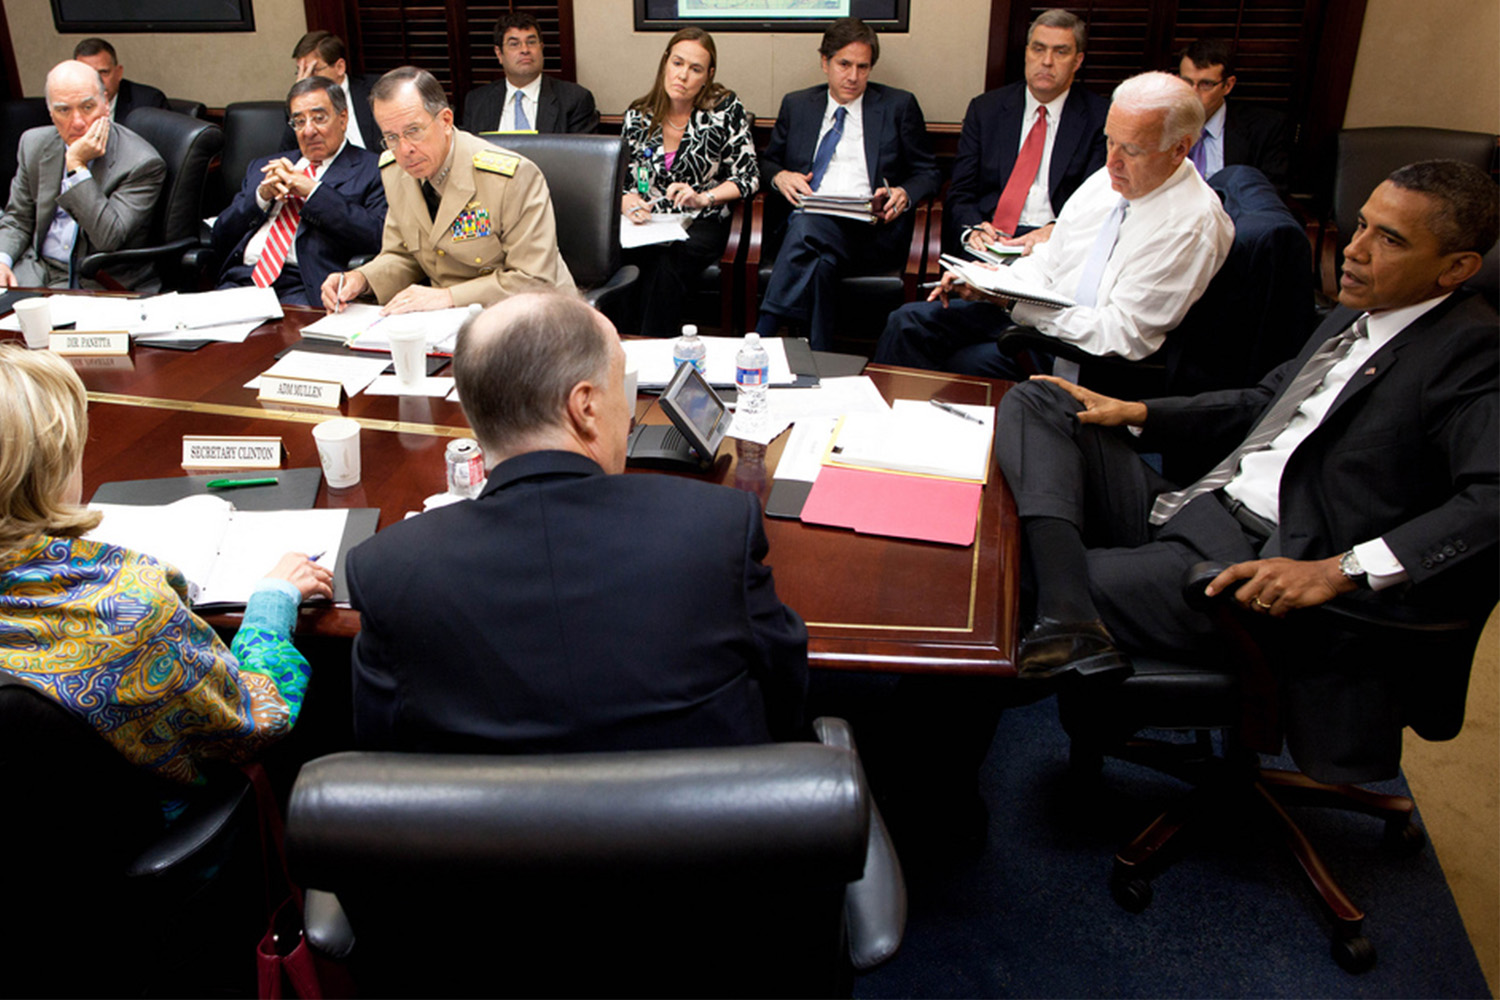 Barack Obama, Joe Biden, Hilary Clinton, and several other government officials sitting at table in situation room 